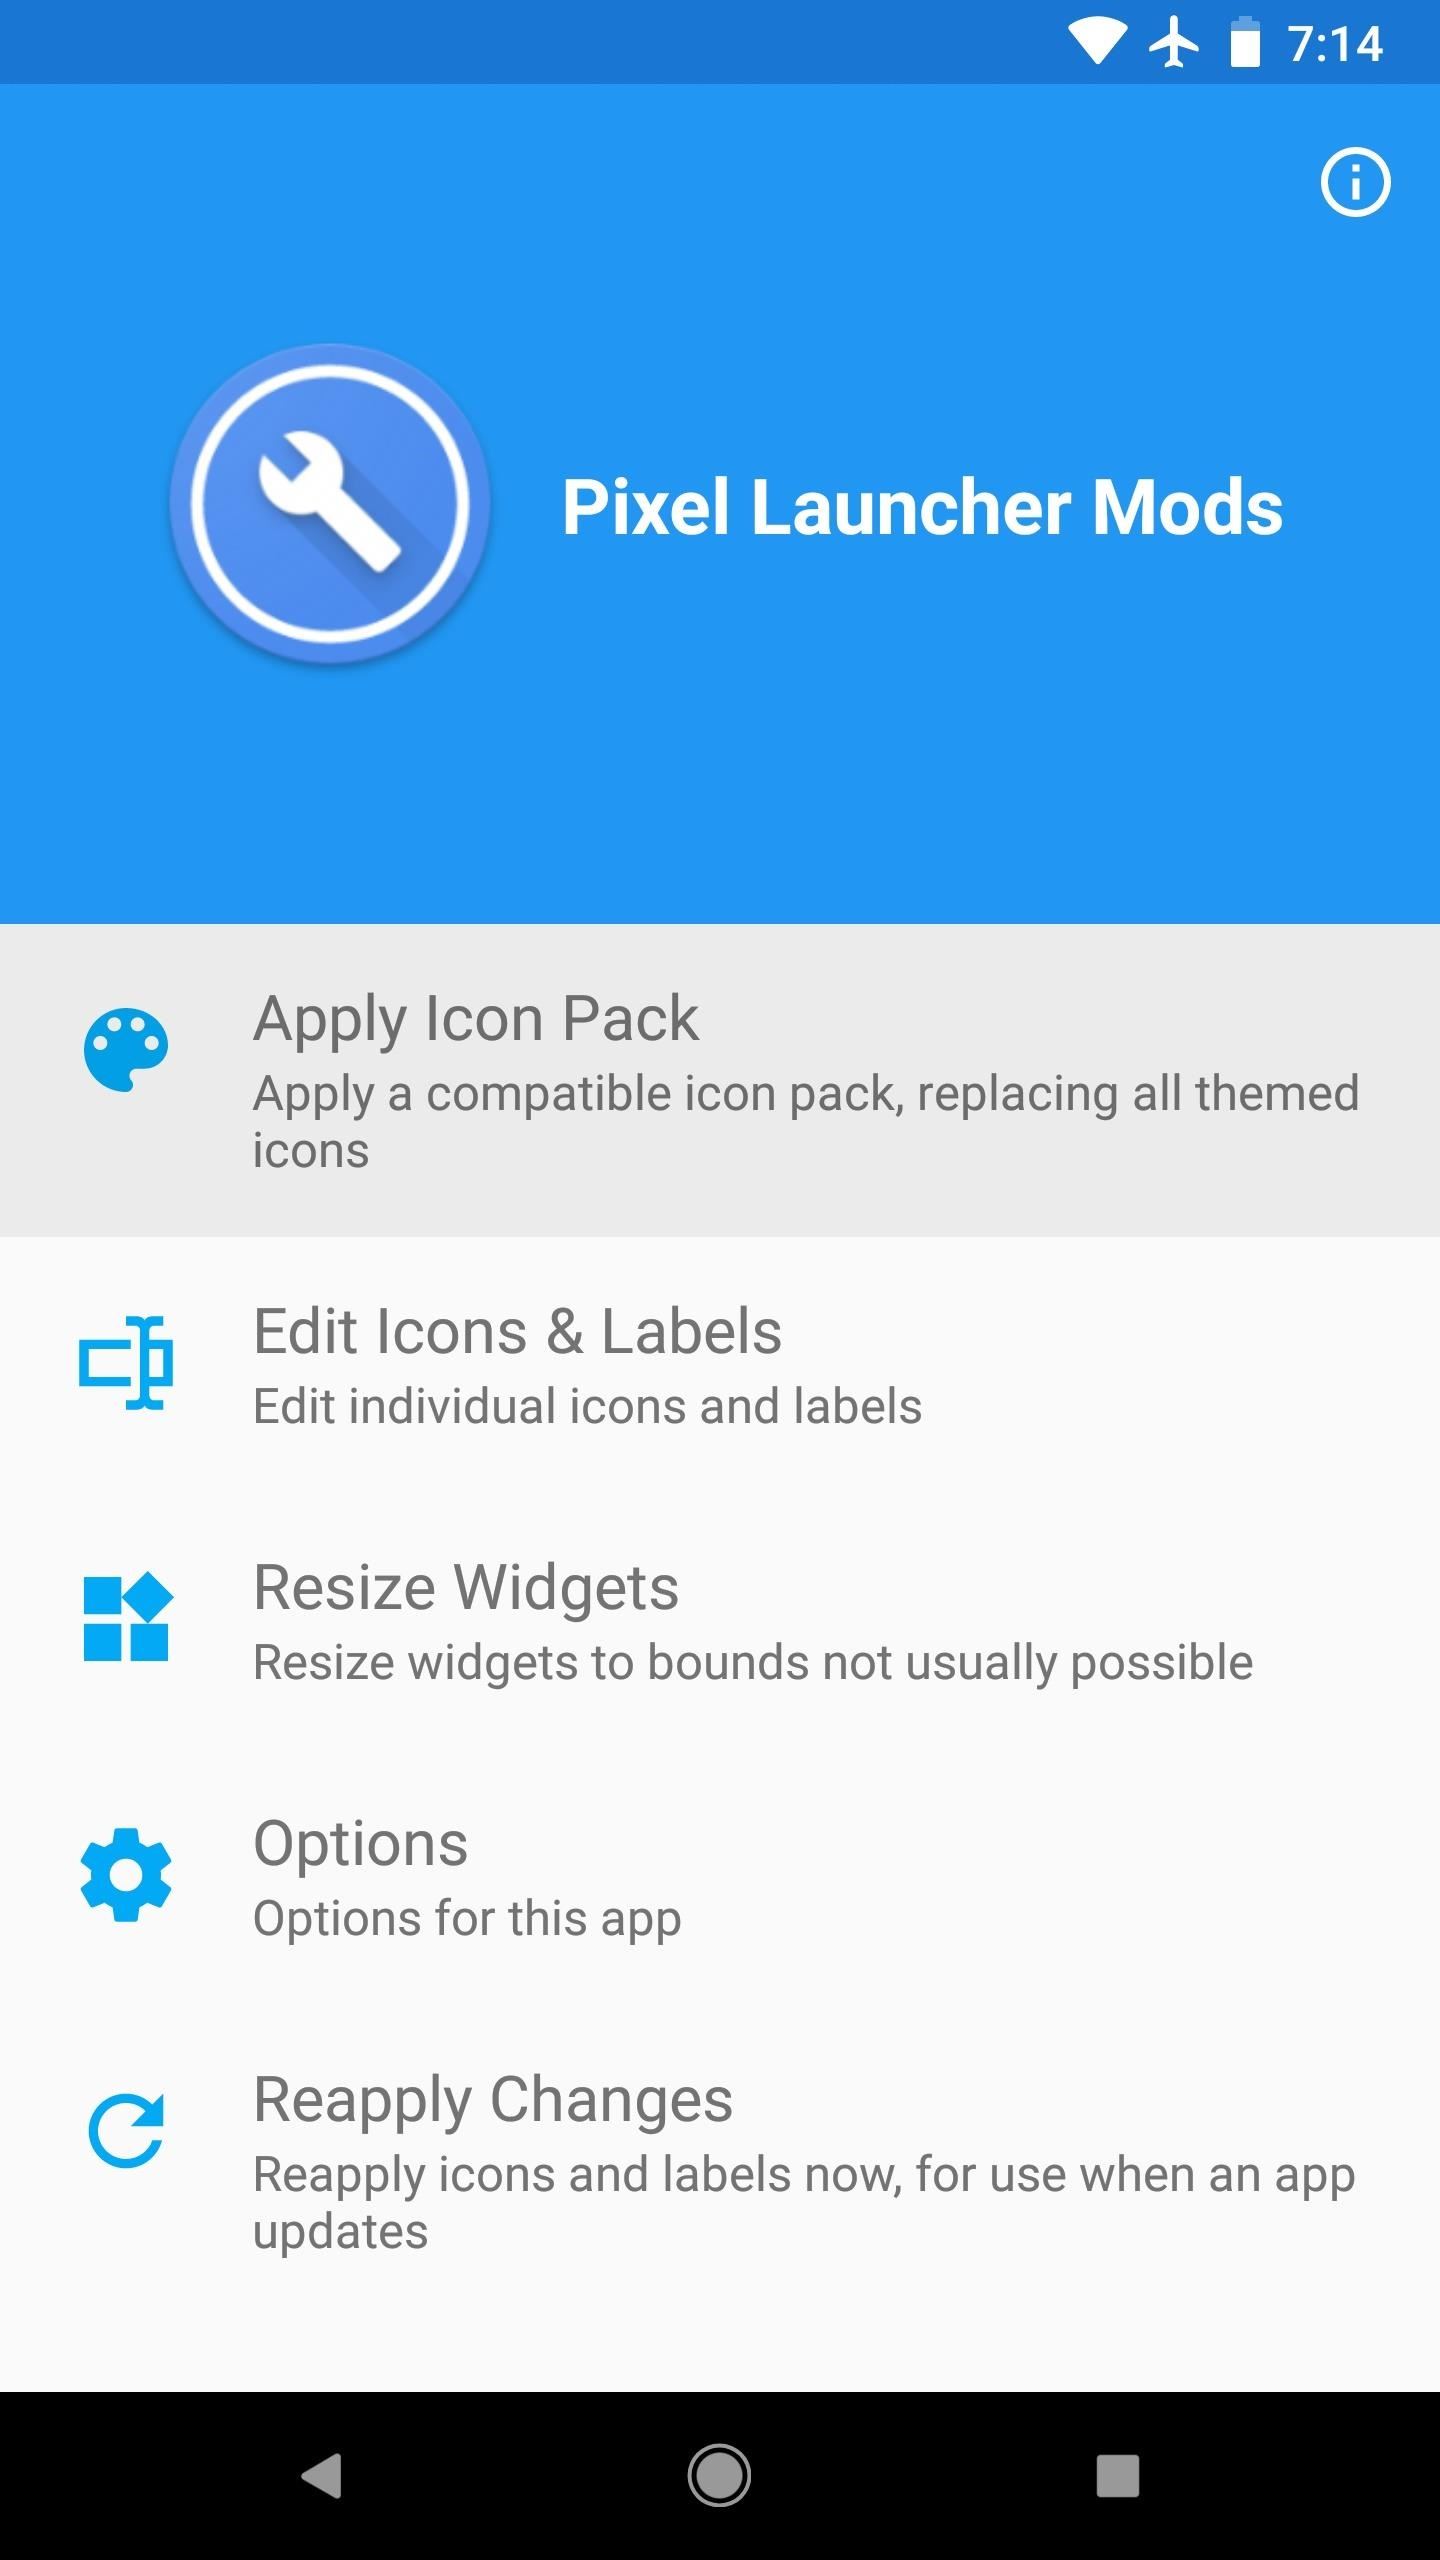 This Mod Gives You Custom Icon Packs & More on the Pixel Launcher